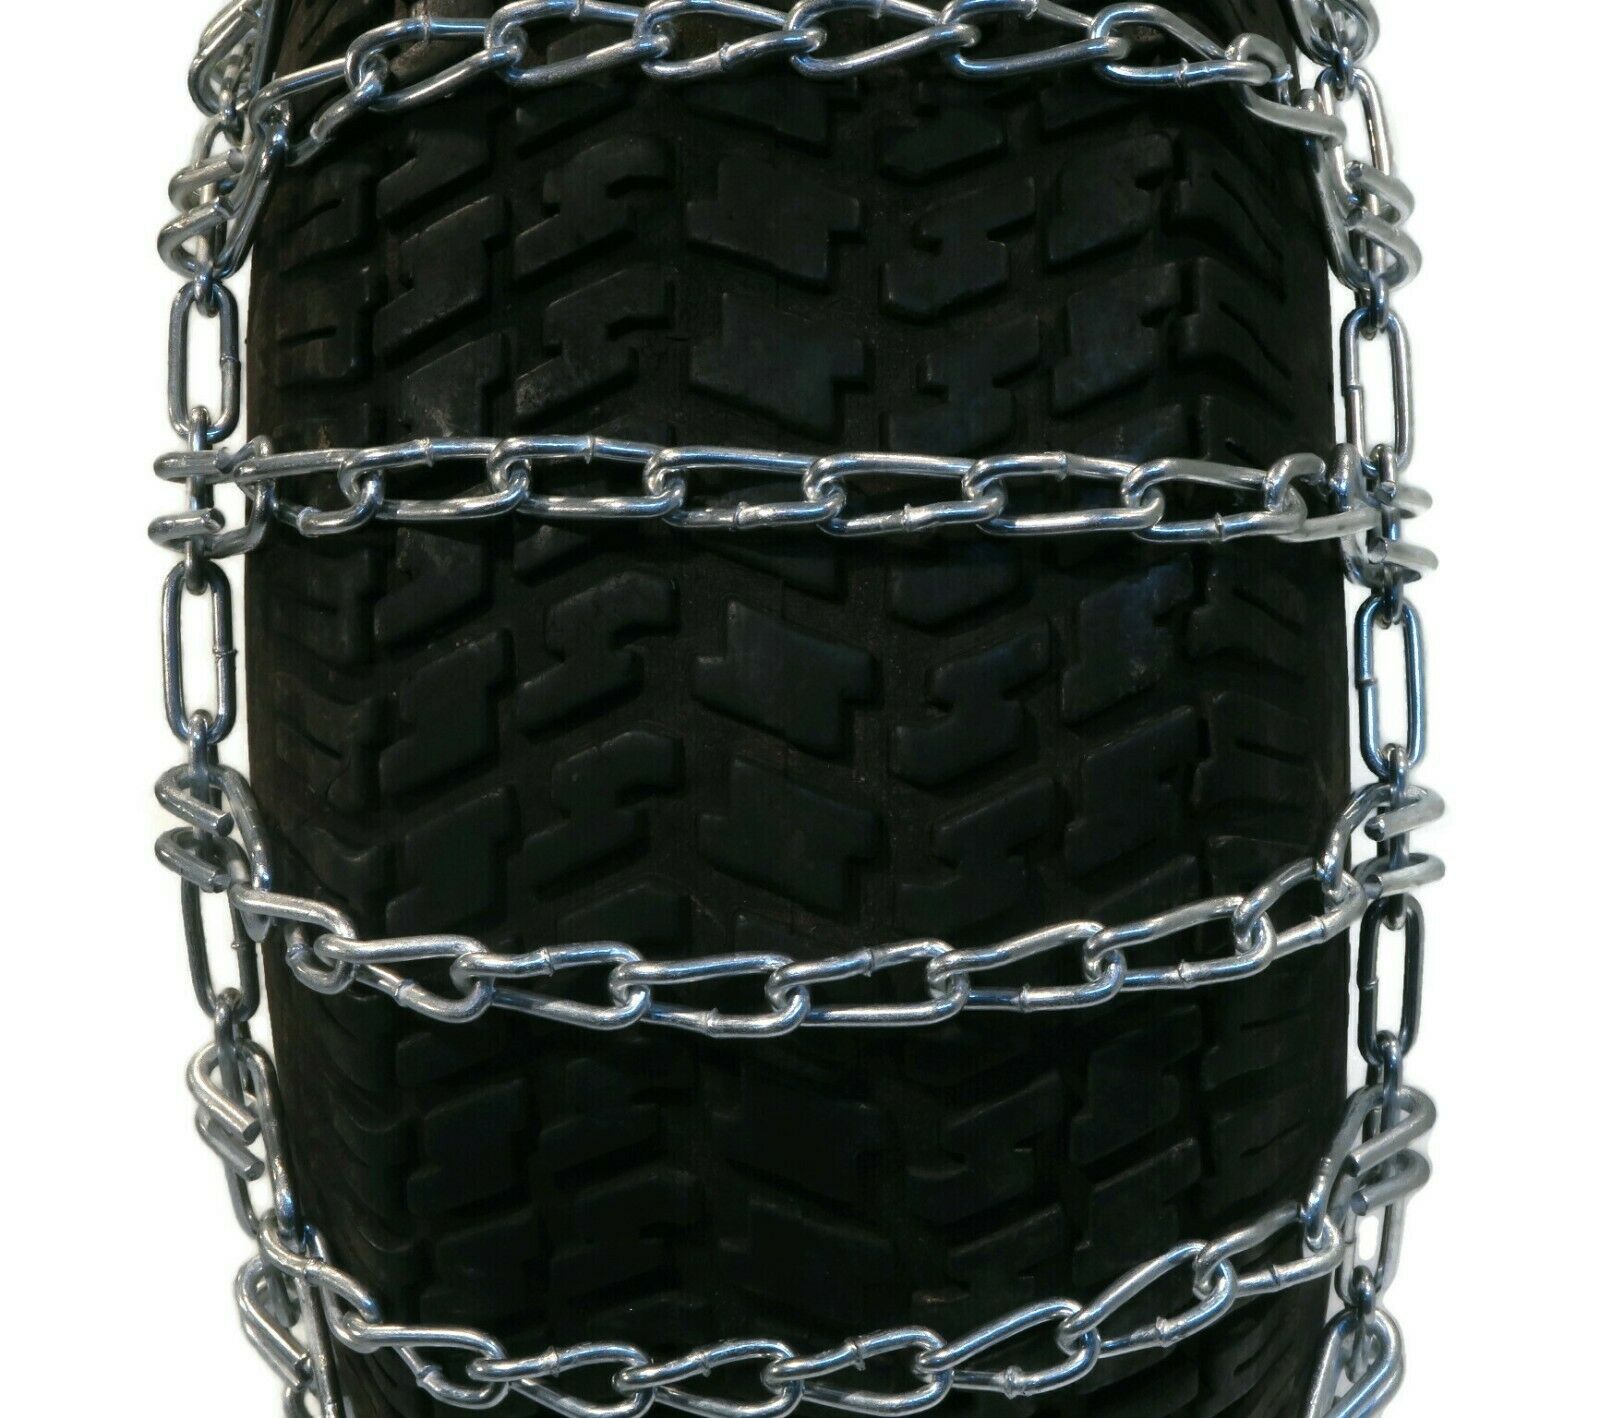 The ROP Shop | Pair 2 Link Tire Chains 16x6.50x8 For MTD / Cub Cadet Lawn Mower Tractor Rider - image 5 of 6